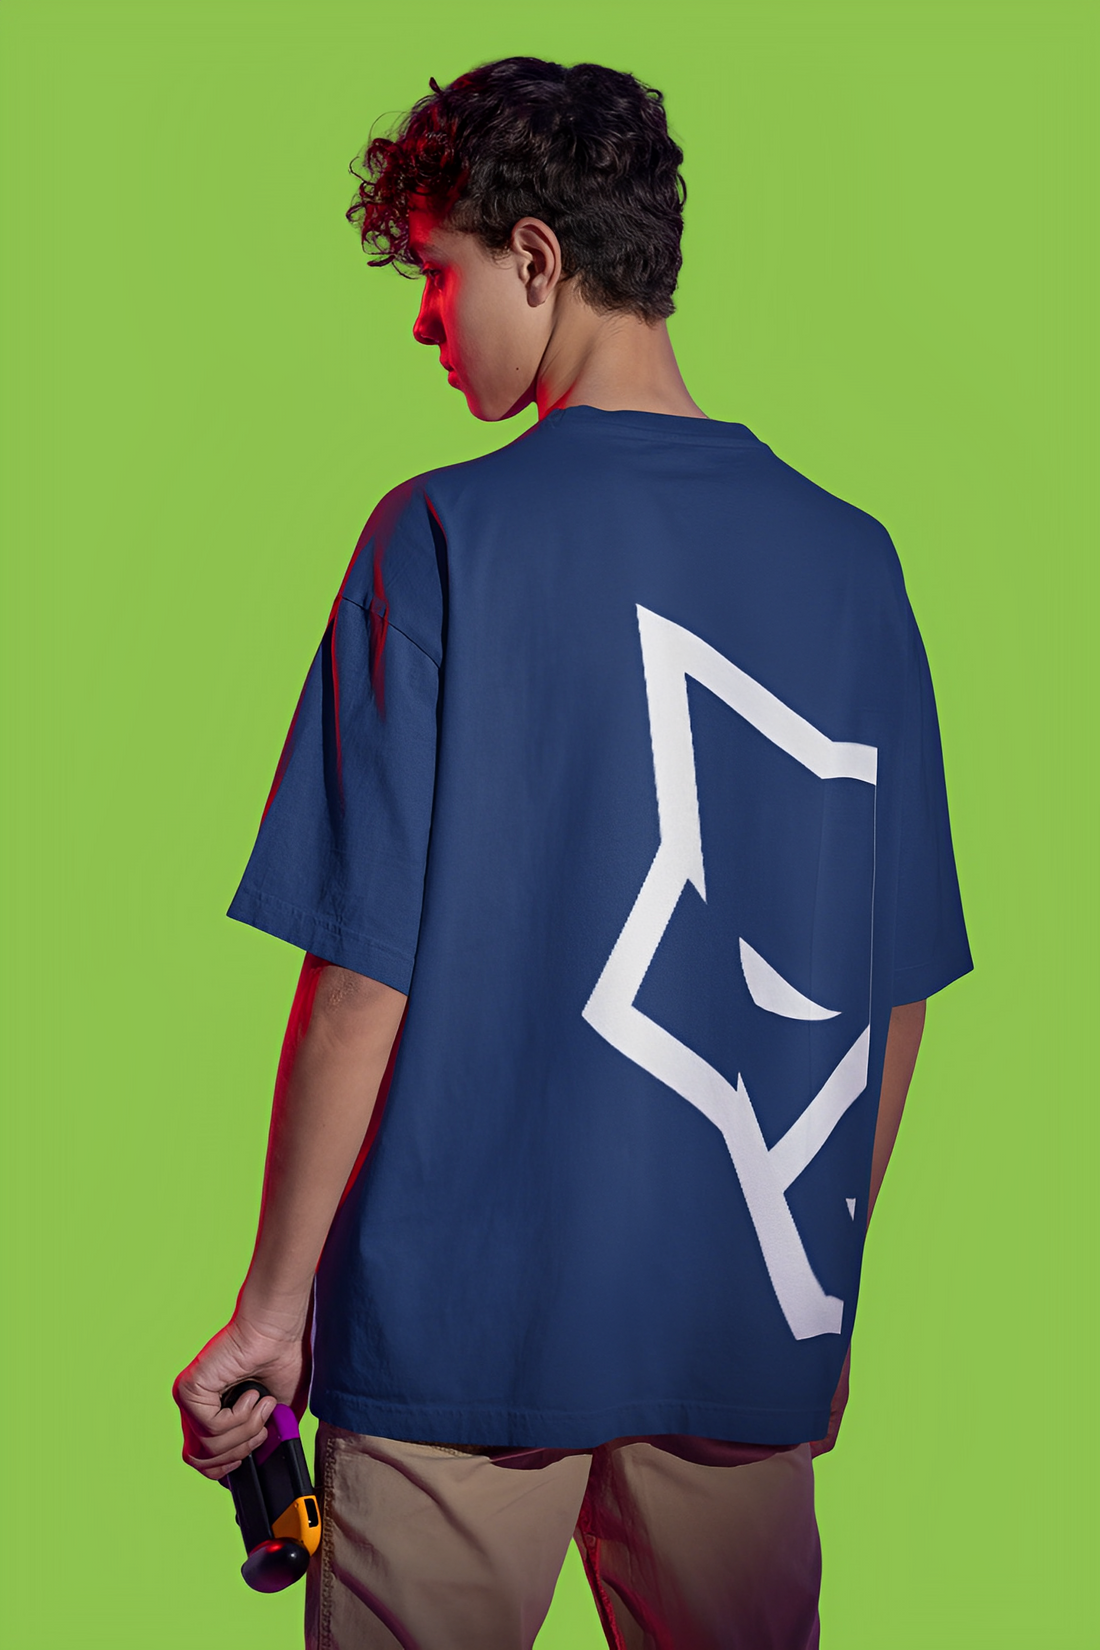 Upgrade Your Wardrobe with the Bwolves Blue Oversized Tee